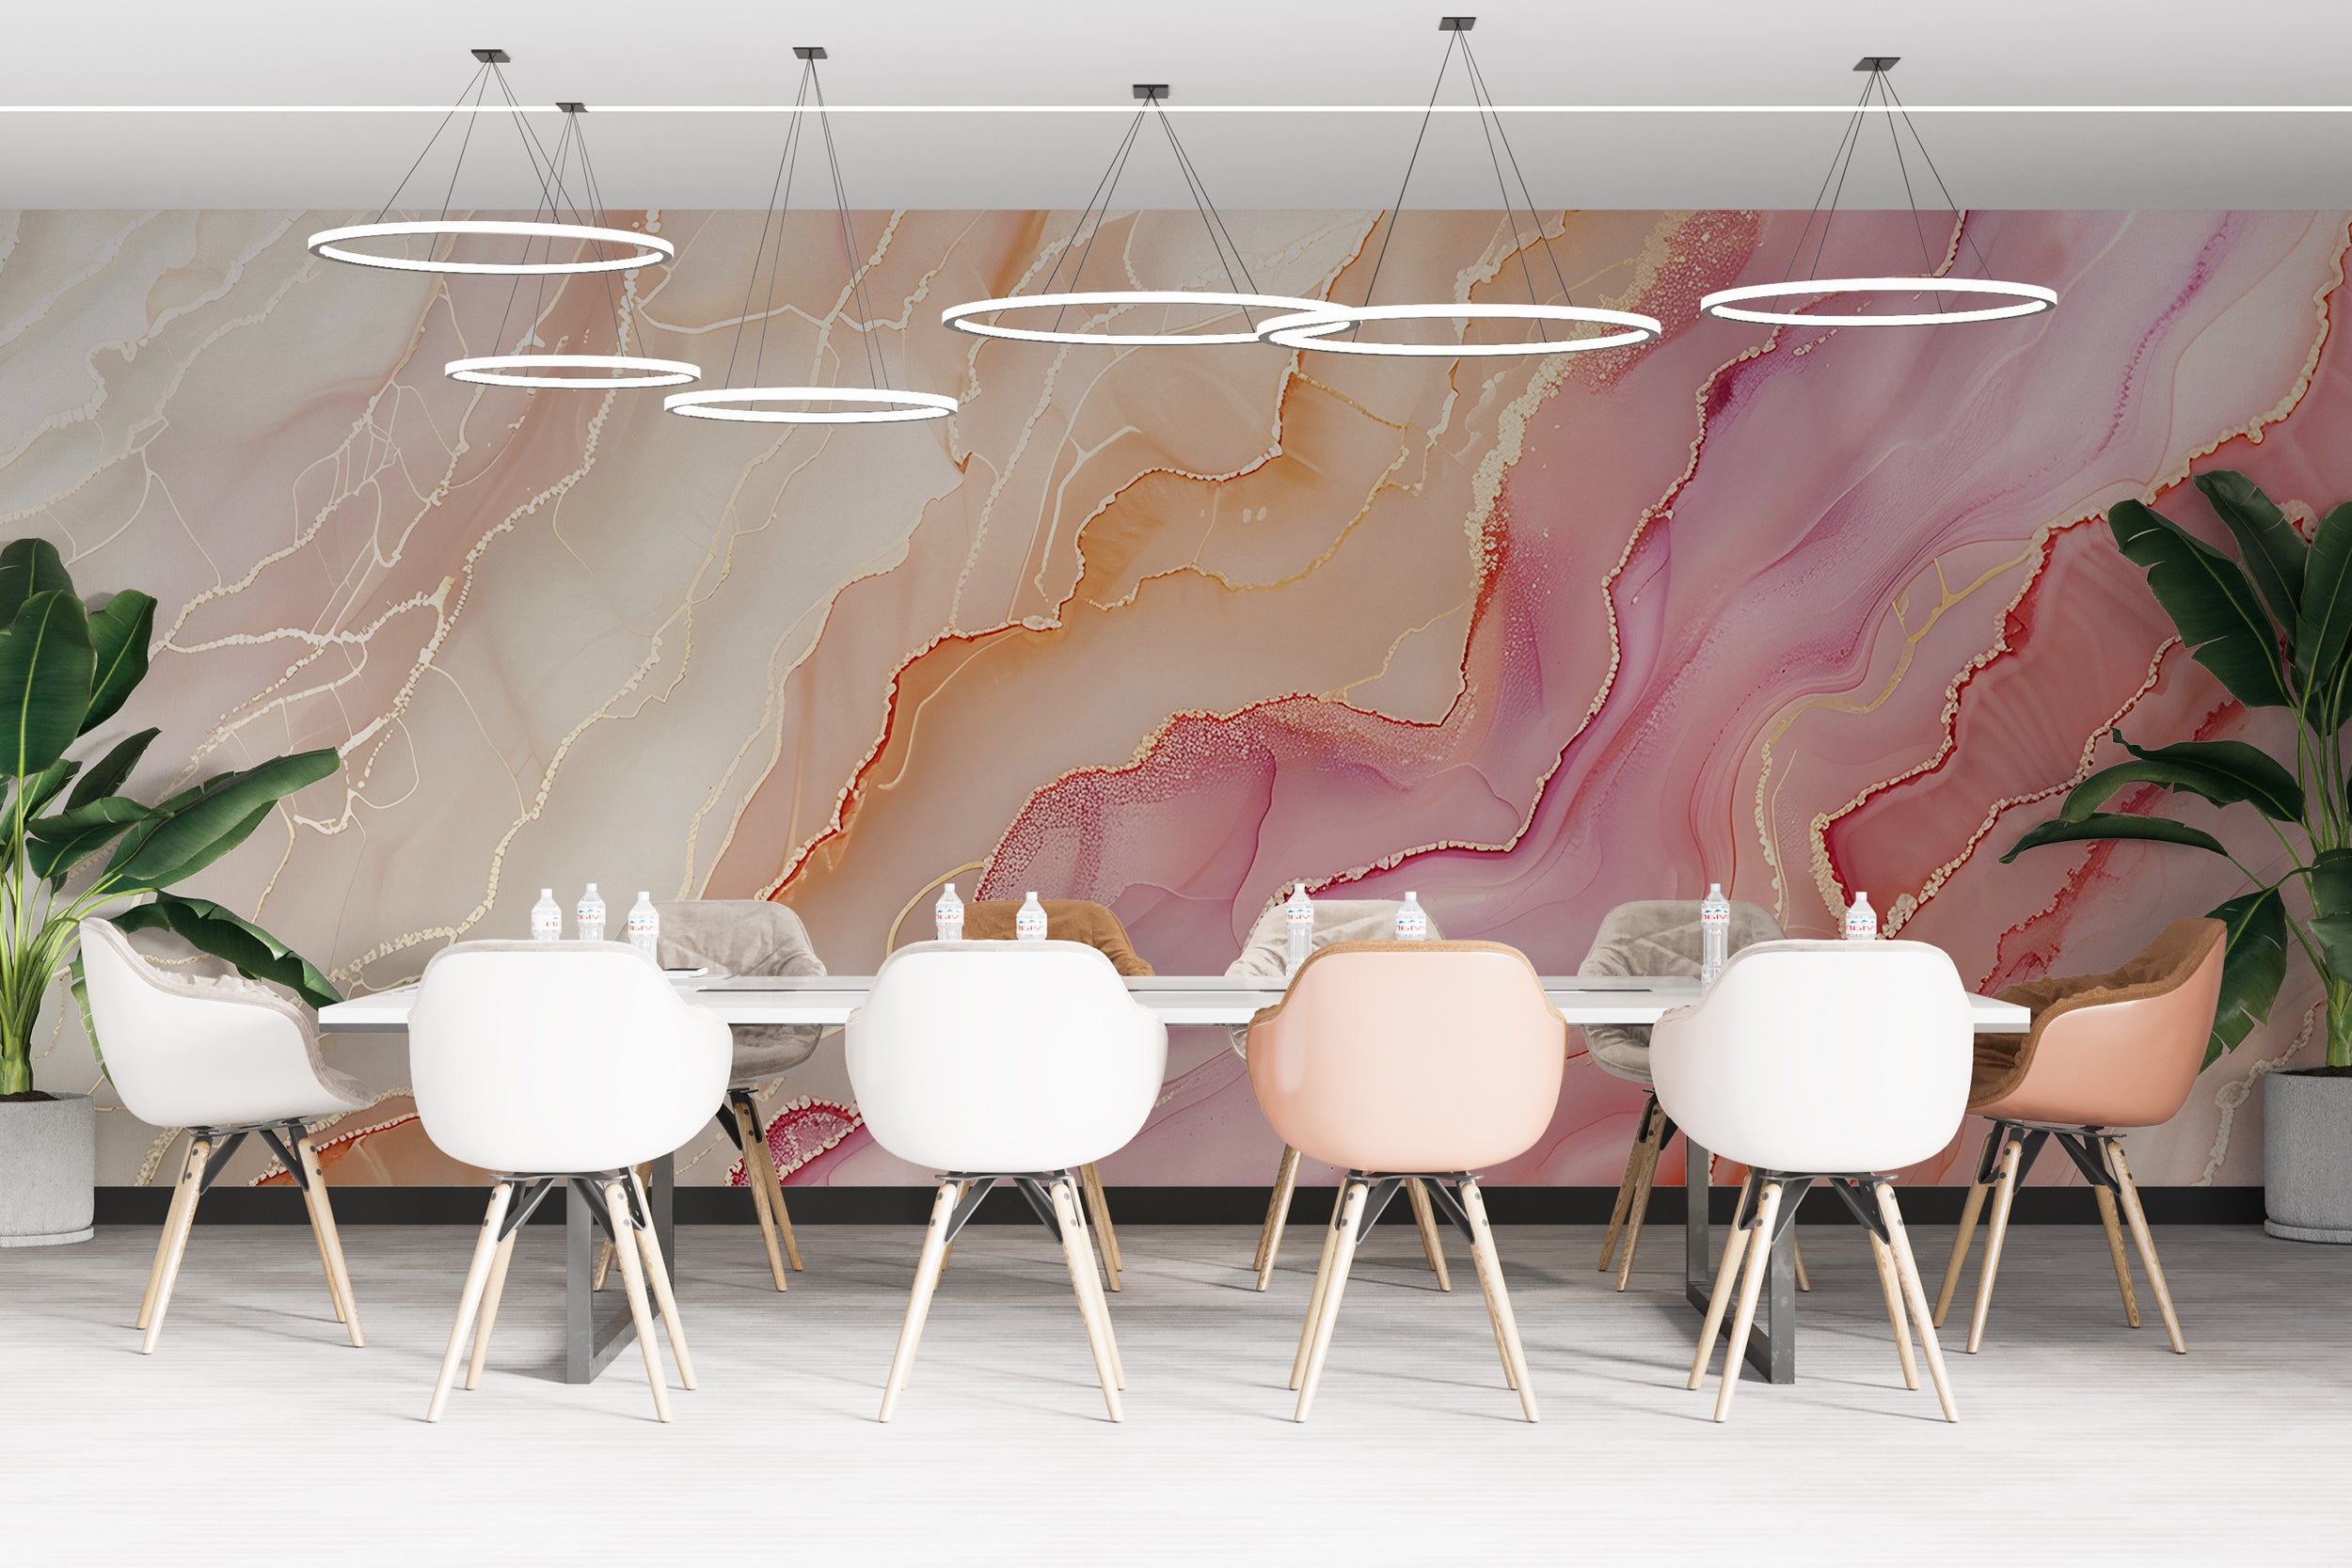 Marble Texture in Soft Pastel Colors Wallpaper, Peel and Stick Colorful Alcohol Ink Wall Mural, Removable Accent Wall Marble Decal